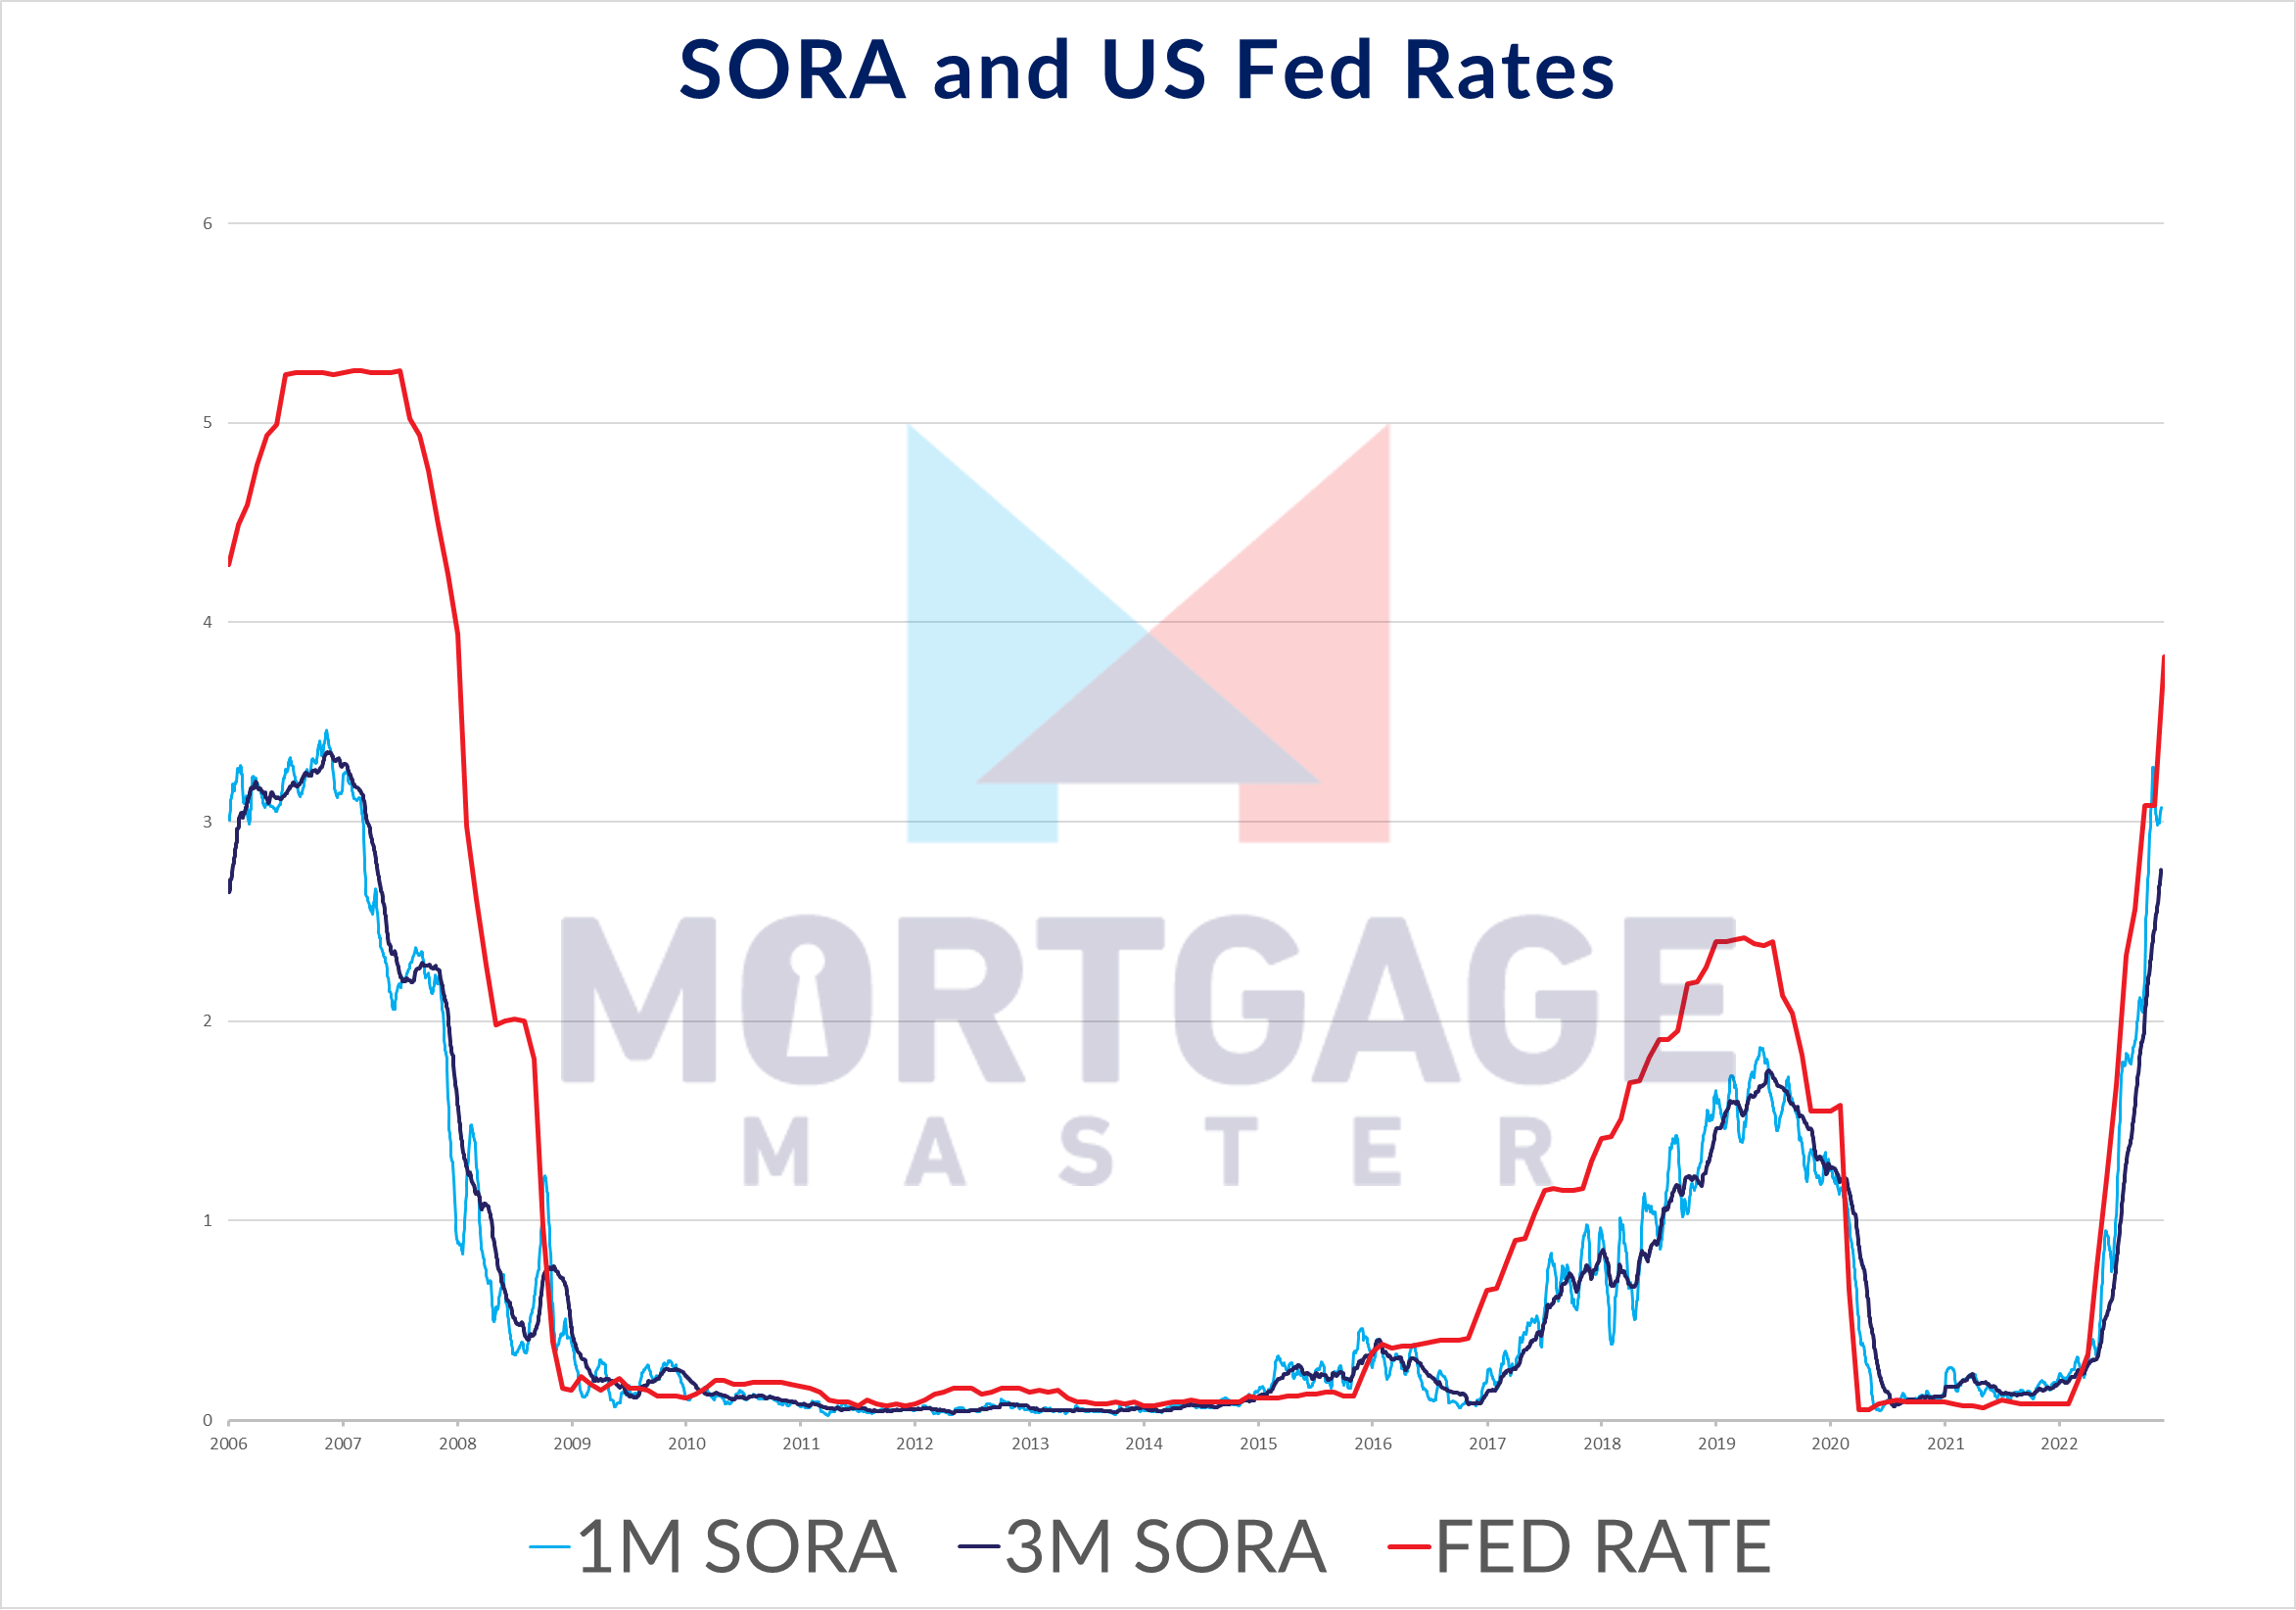 FED Funds Rate vs 1M SORA vs 3M SORA from 2006 to 2022